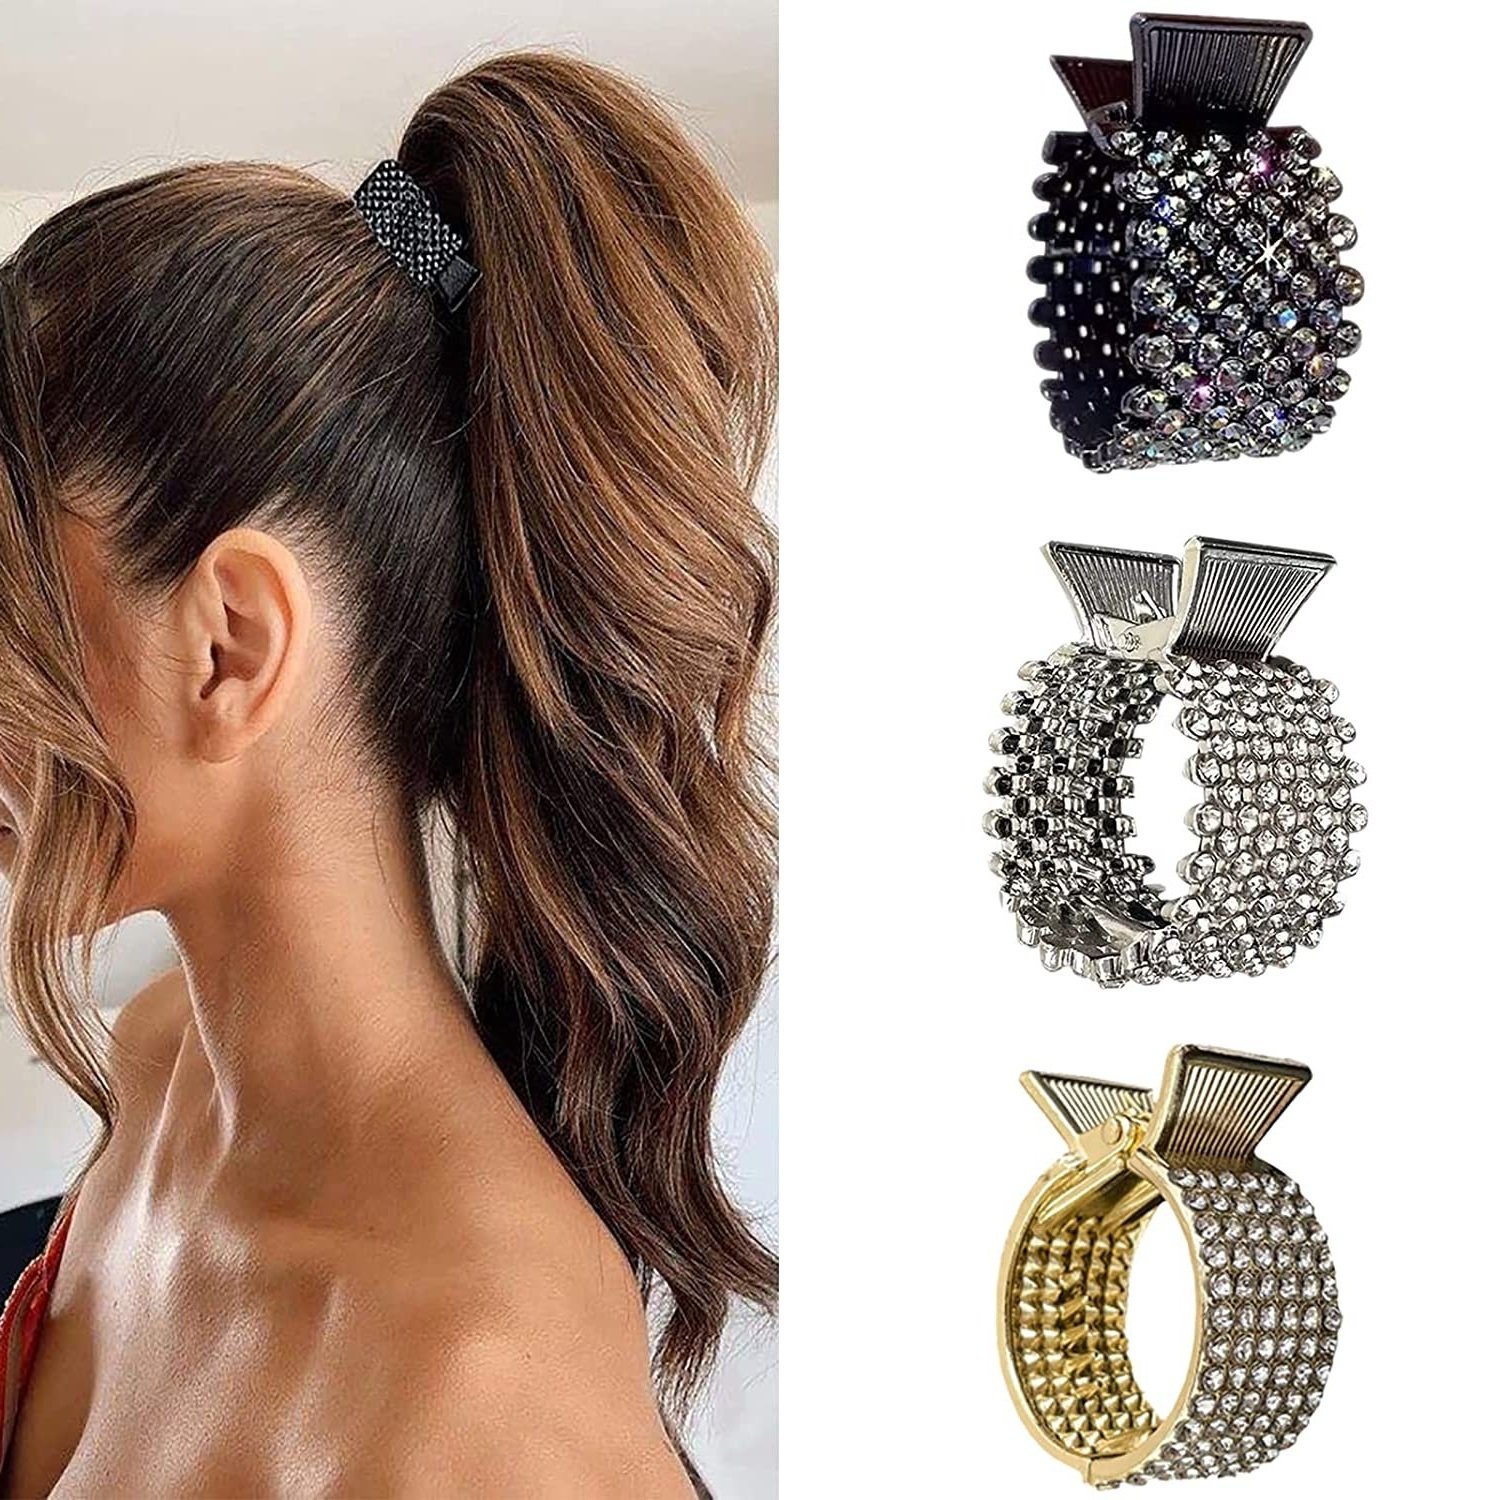  3 Pack Small Hair Clips for High Ponytail